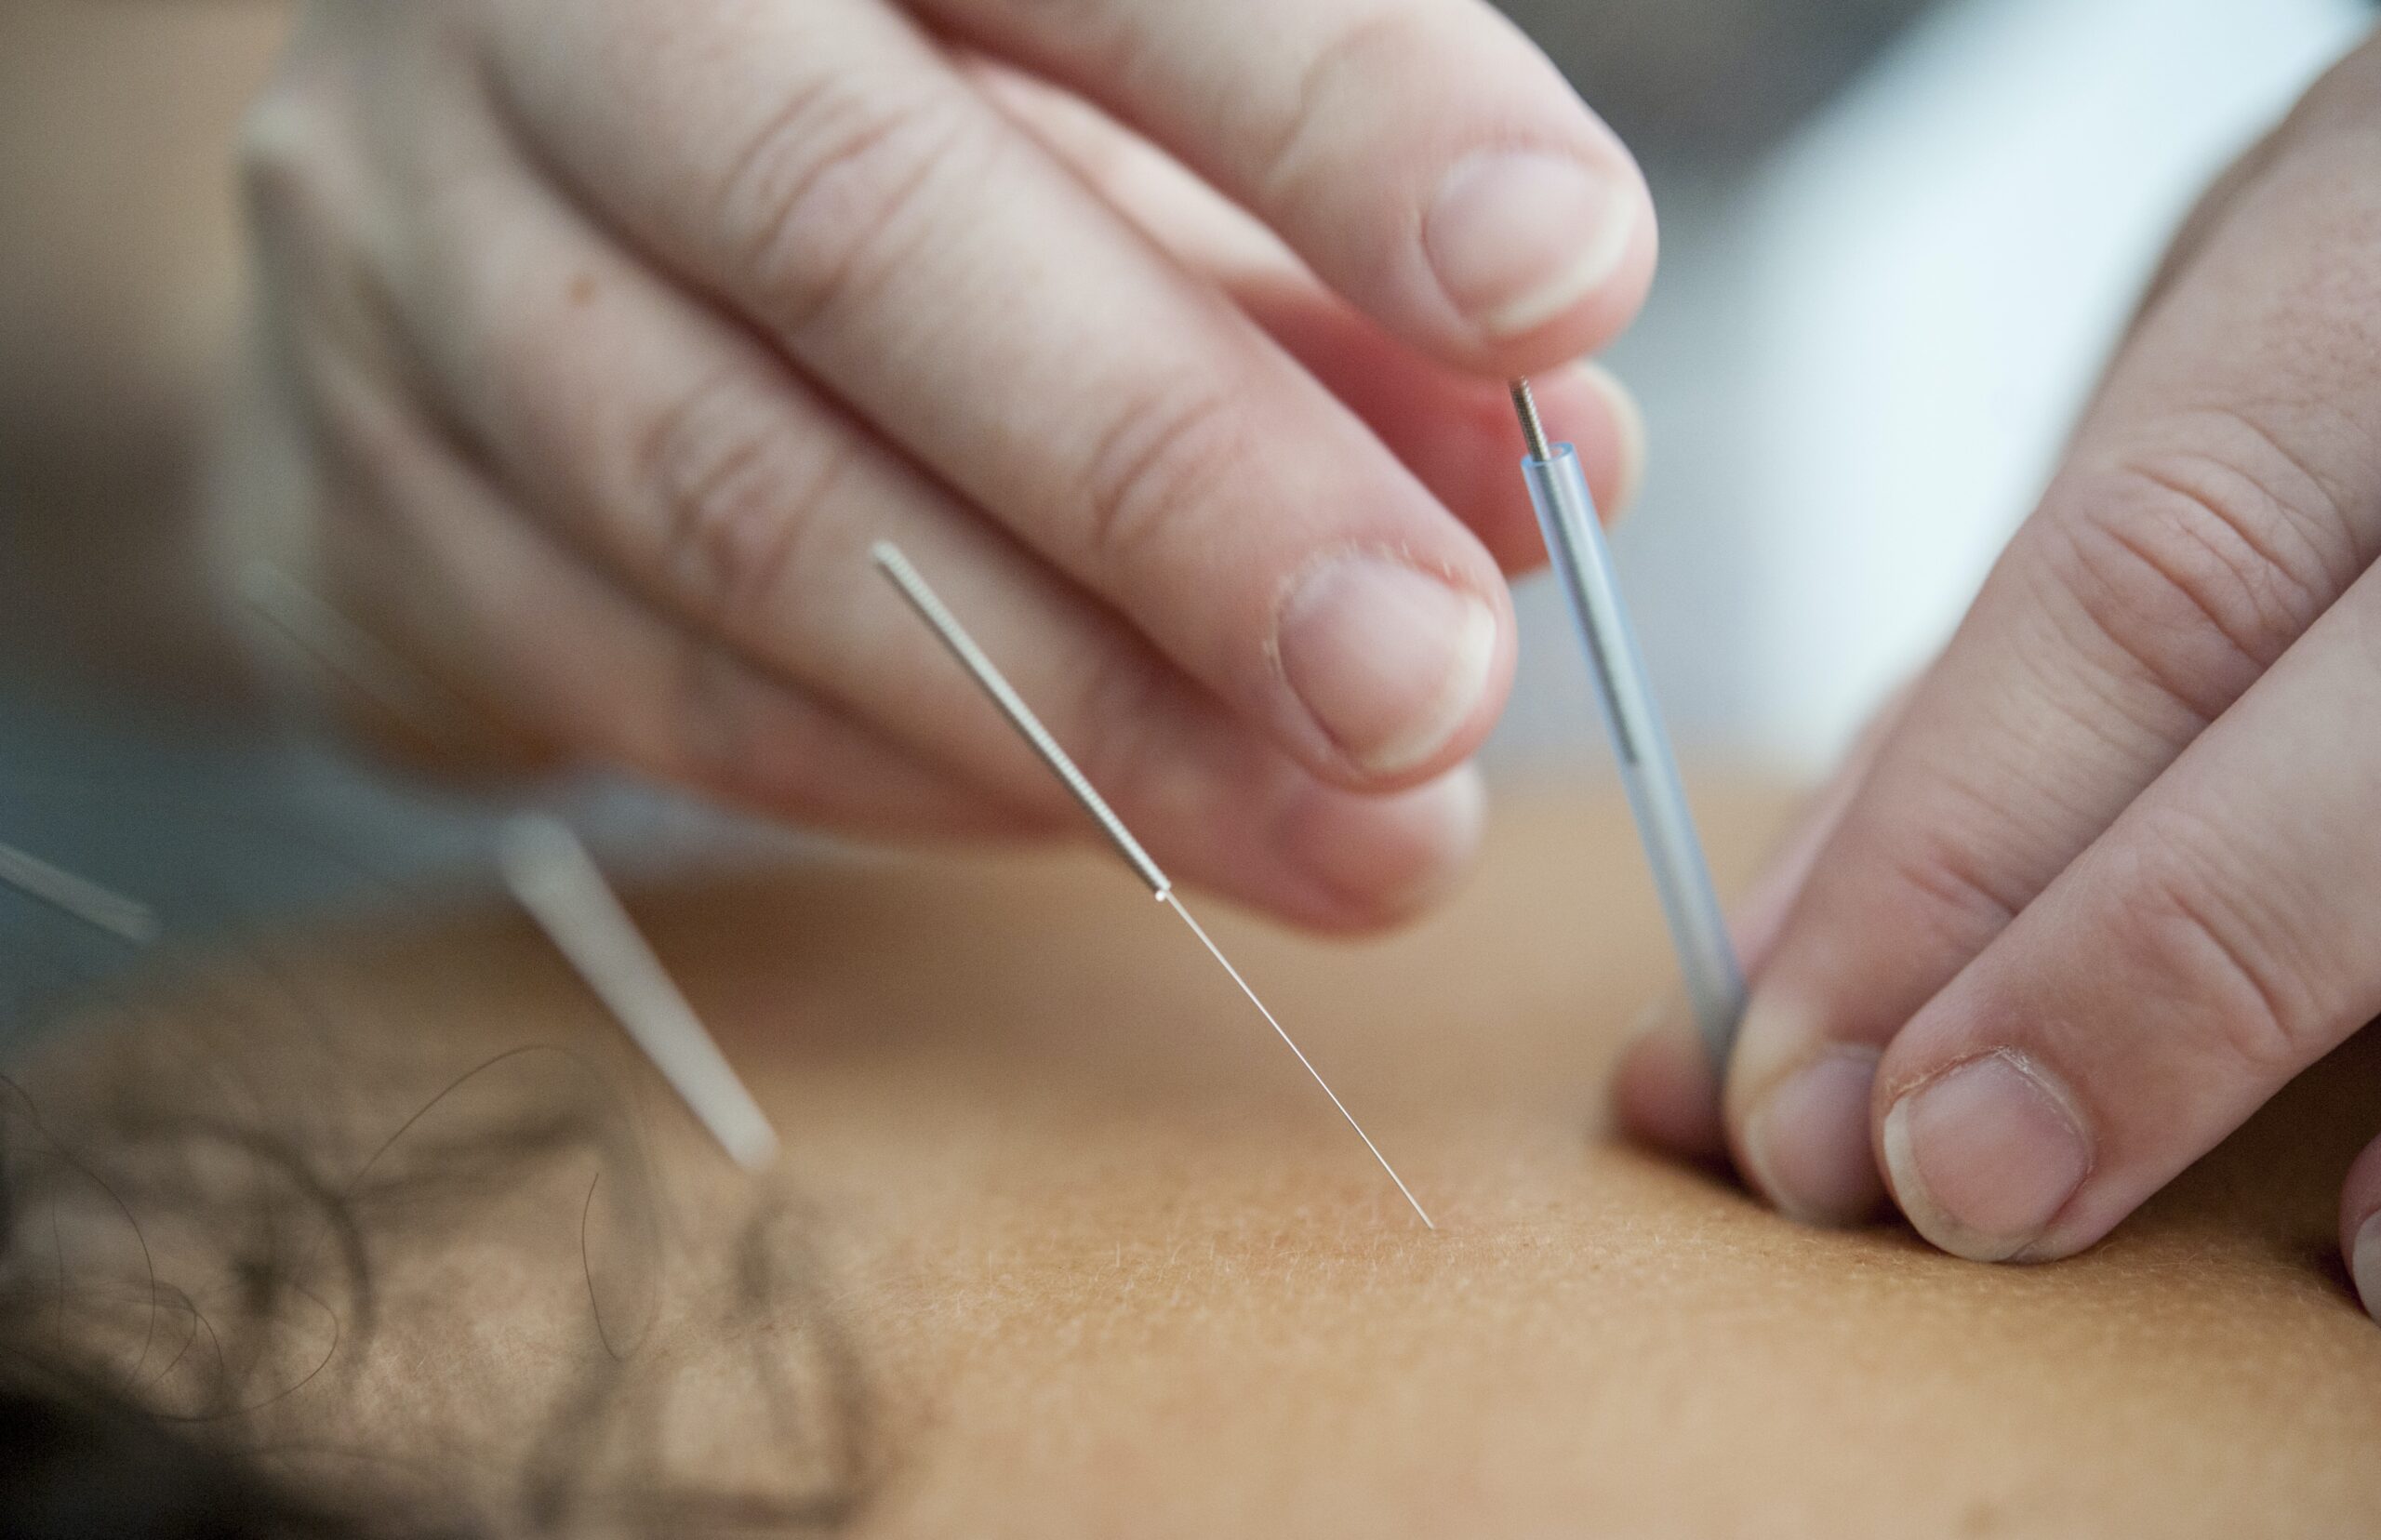 Can Acupuncture Provide Relief For Sacroiliac Joint Discomfort?